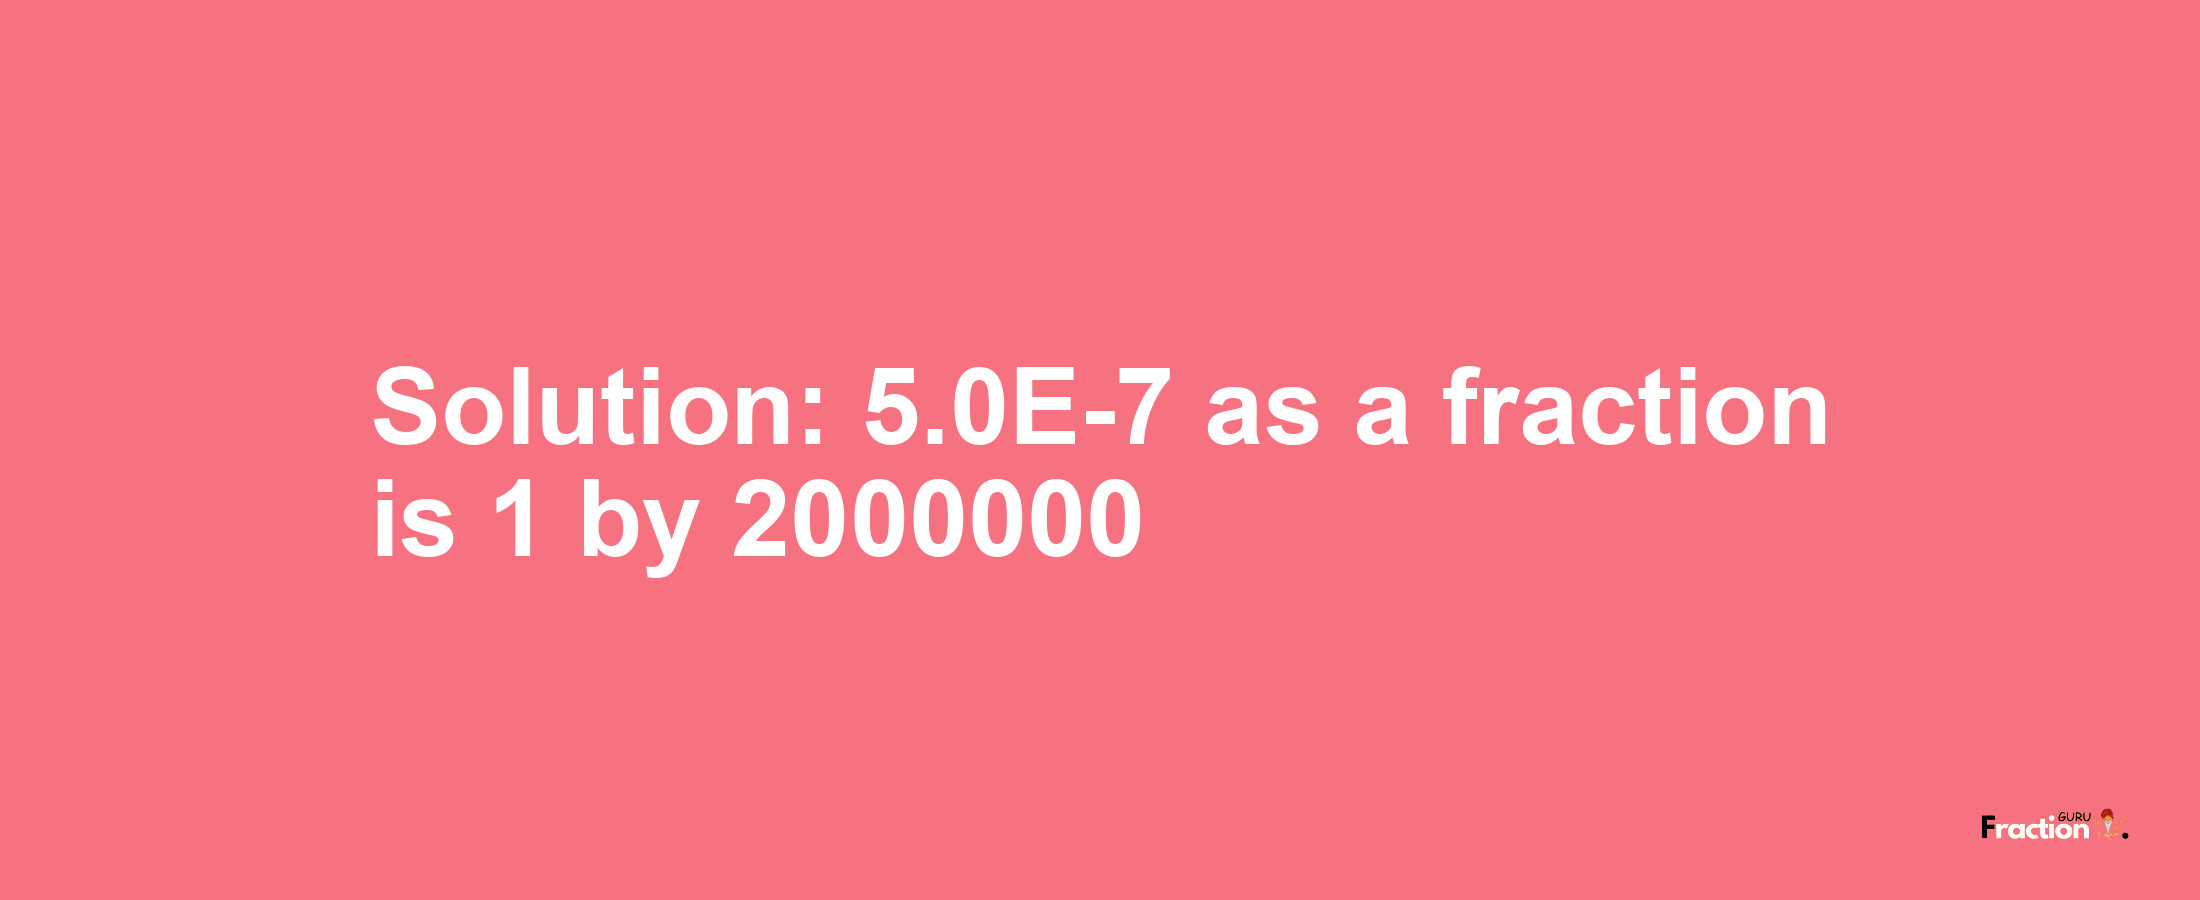 Solution:5.0E-7 as a fraction is 1/2000000